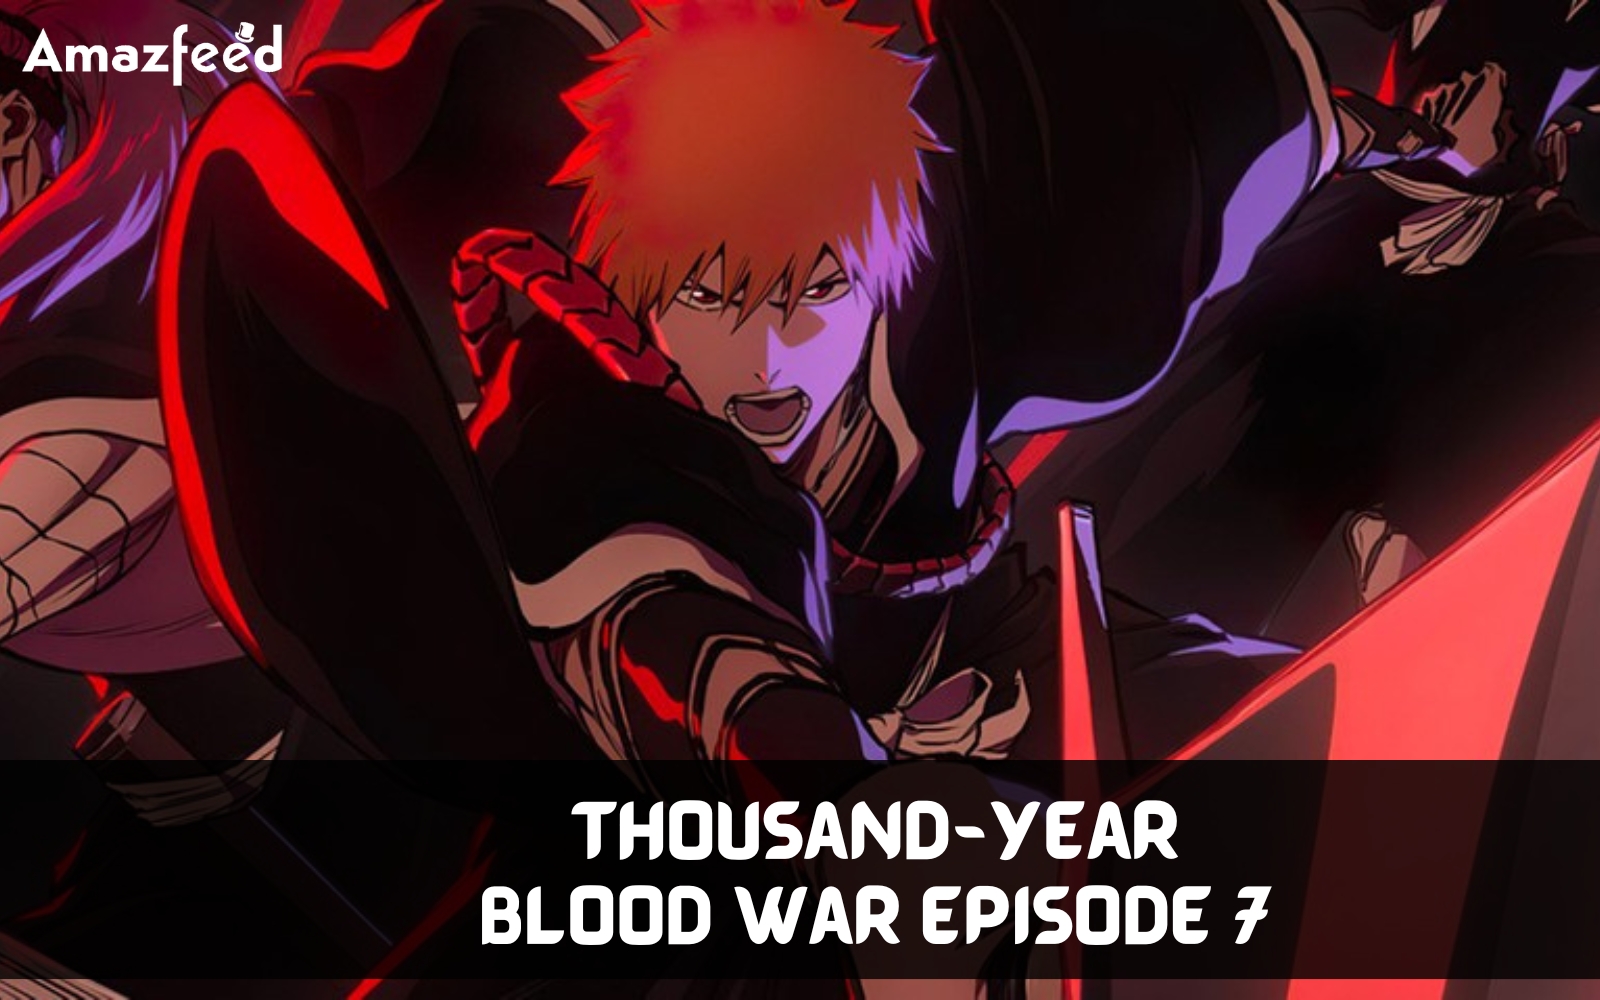 Bleach TYBW episode 7 release date, time confusion for 'Born in